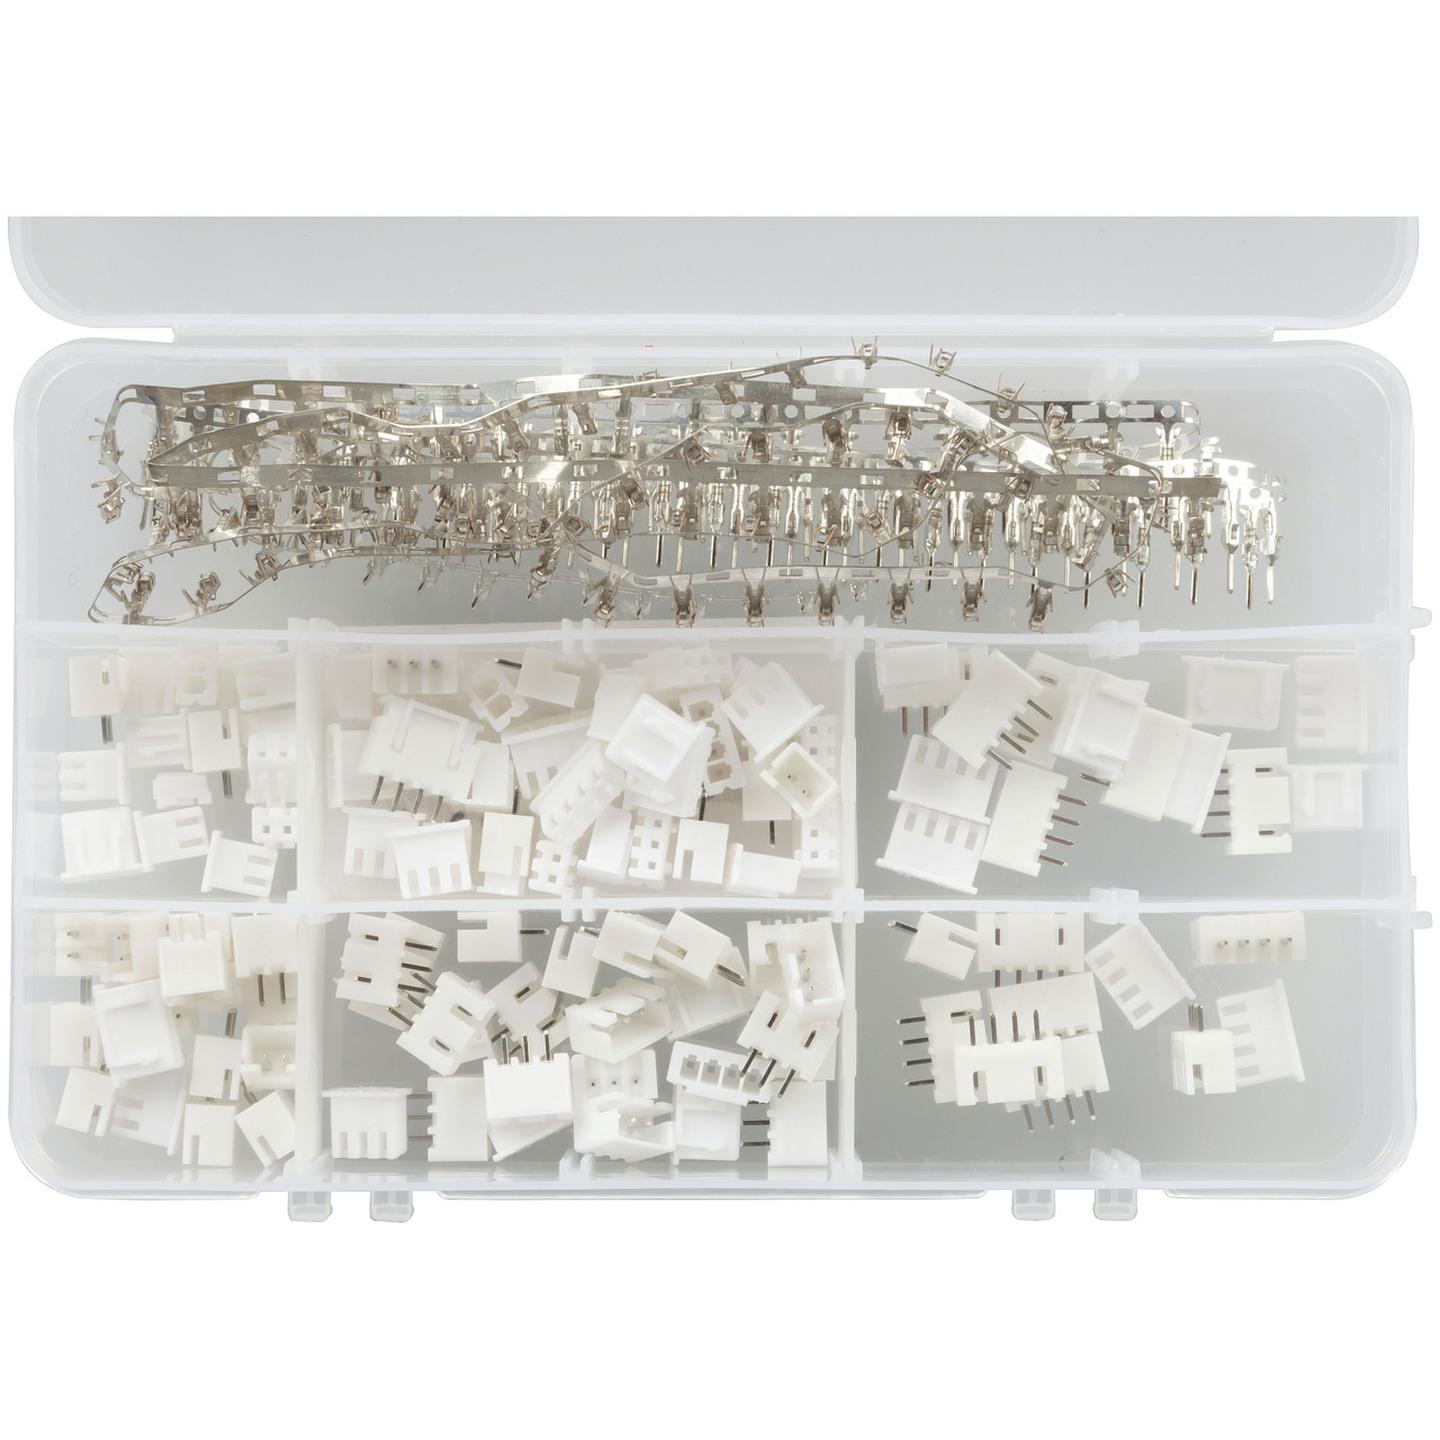 Connectors Kit with Popular JST XHP and PH2 Headers - 120 connector pack